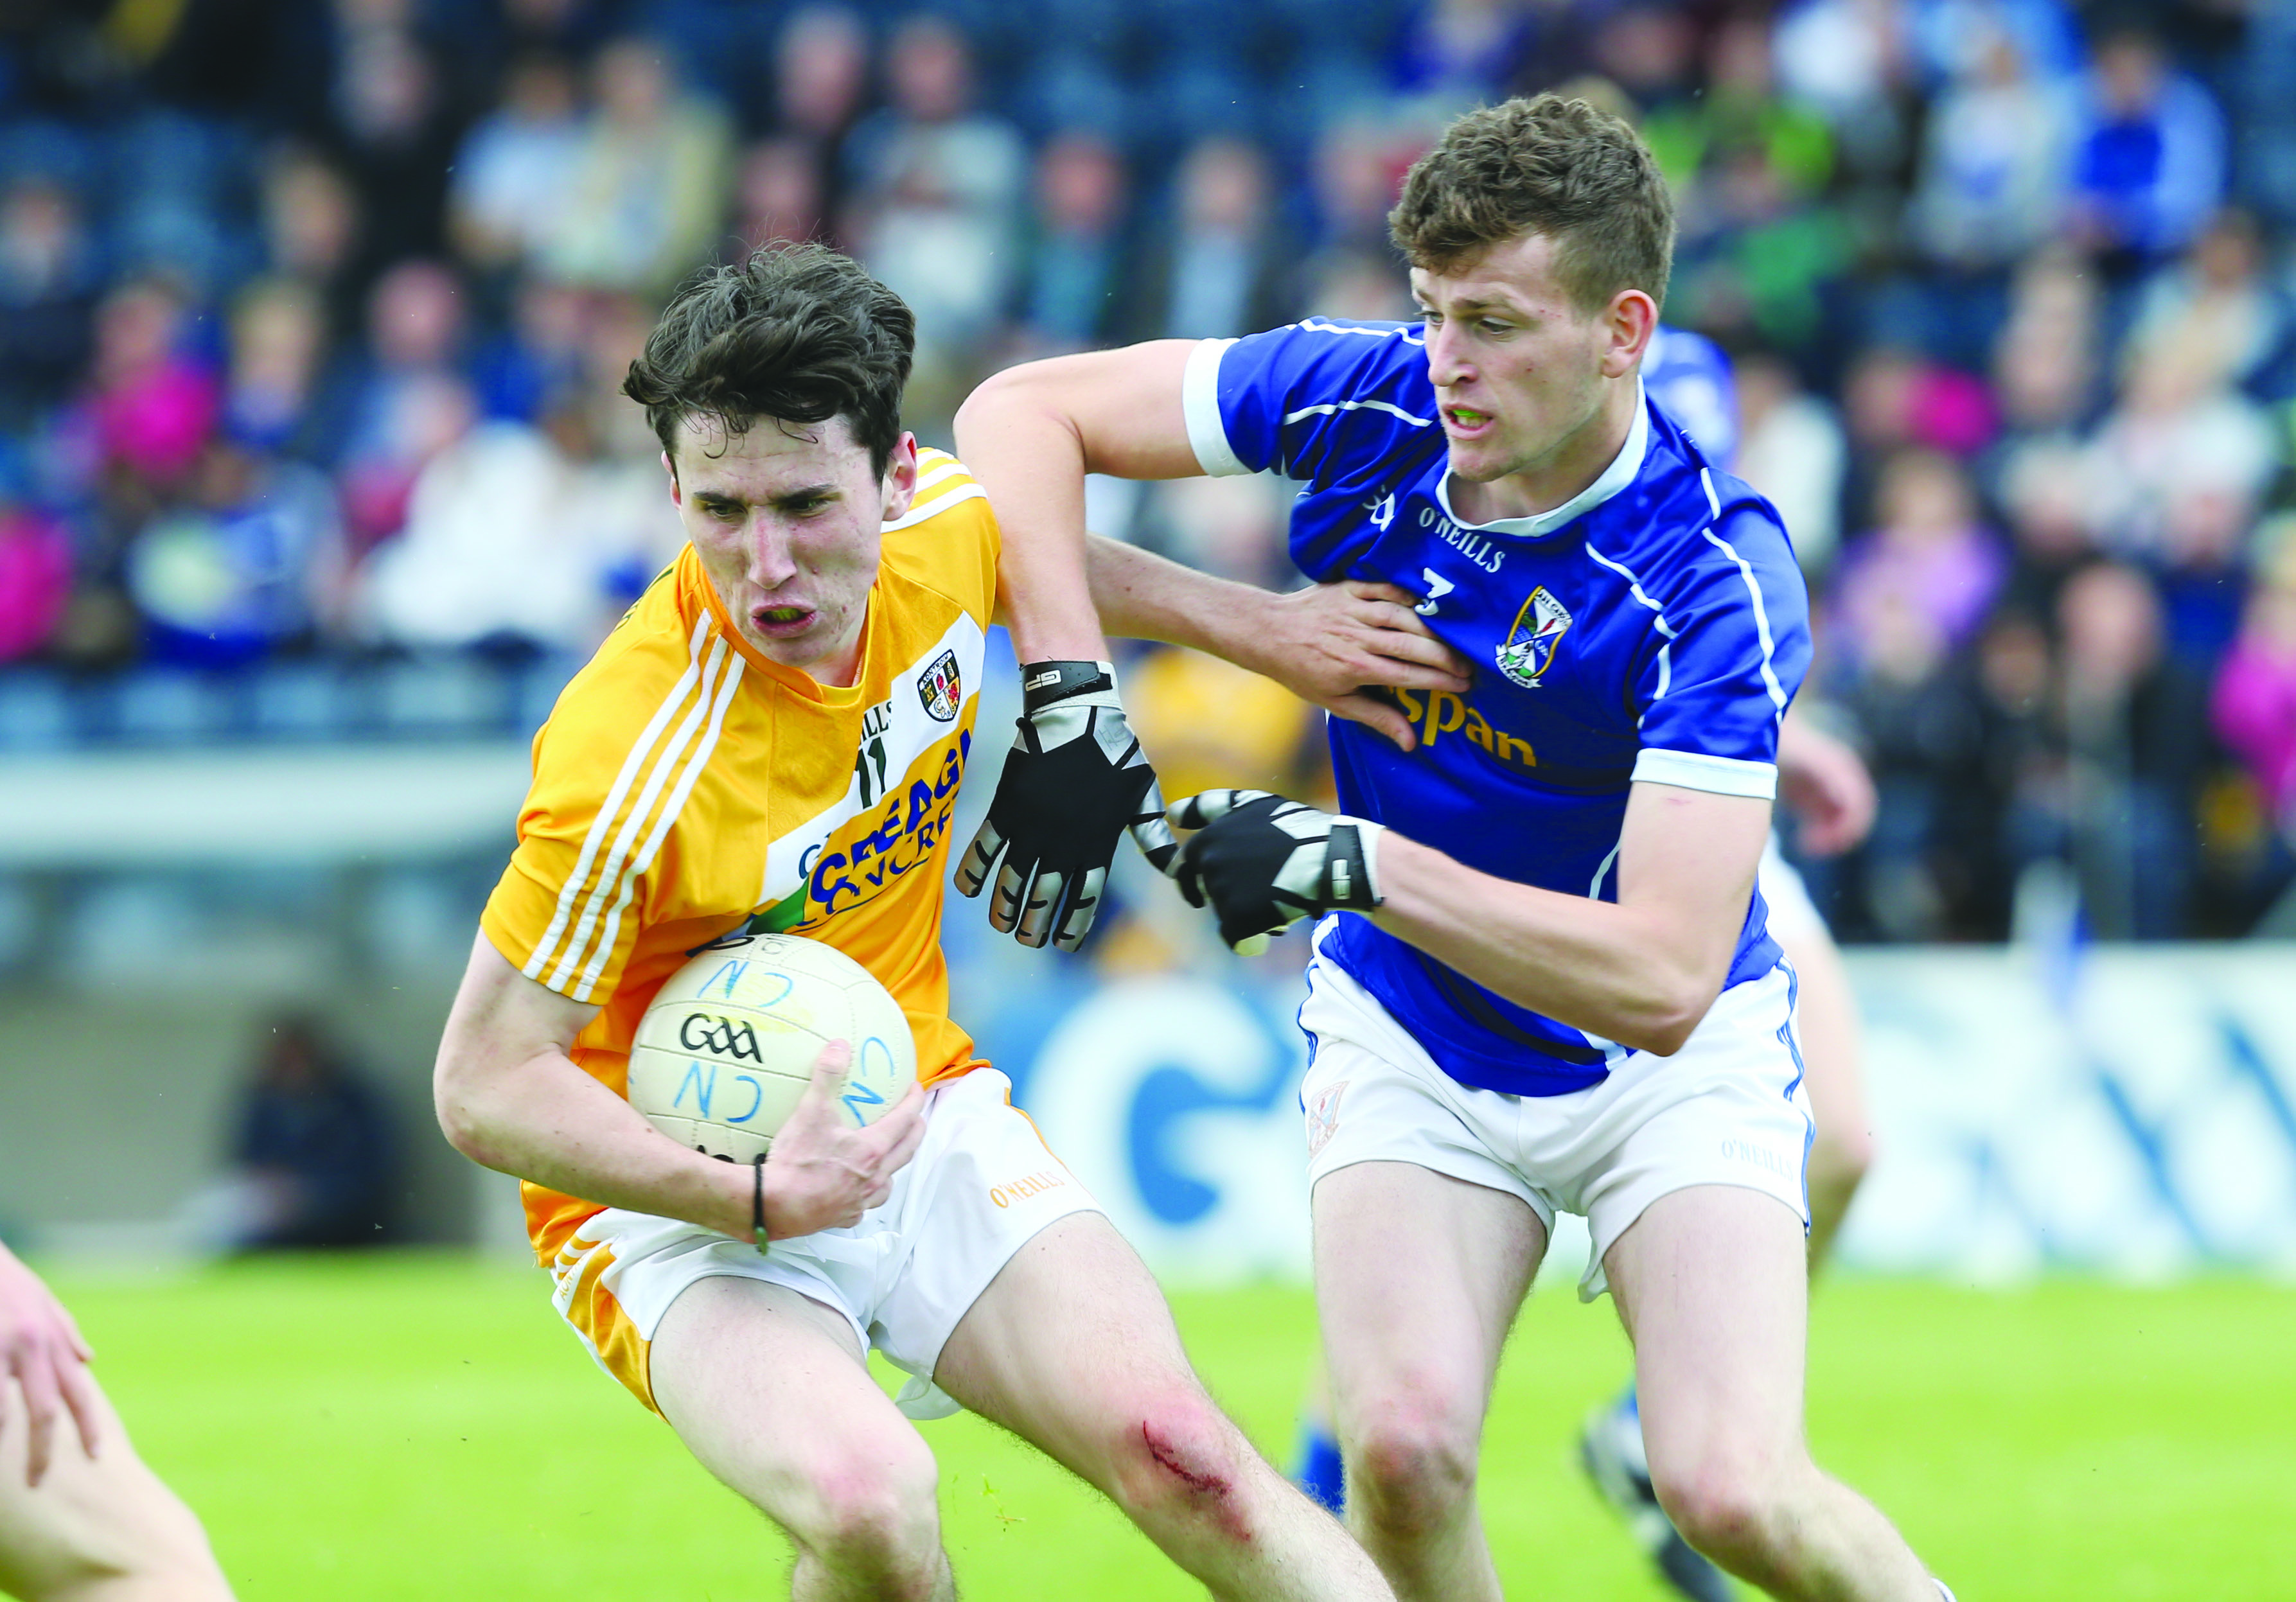 Conor Small will be expected to lead the line for Antrim’s minors on Sunday